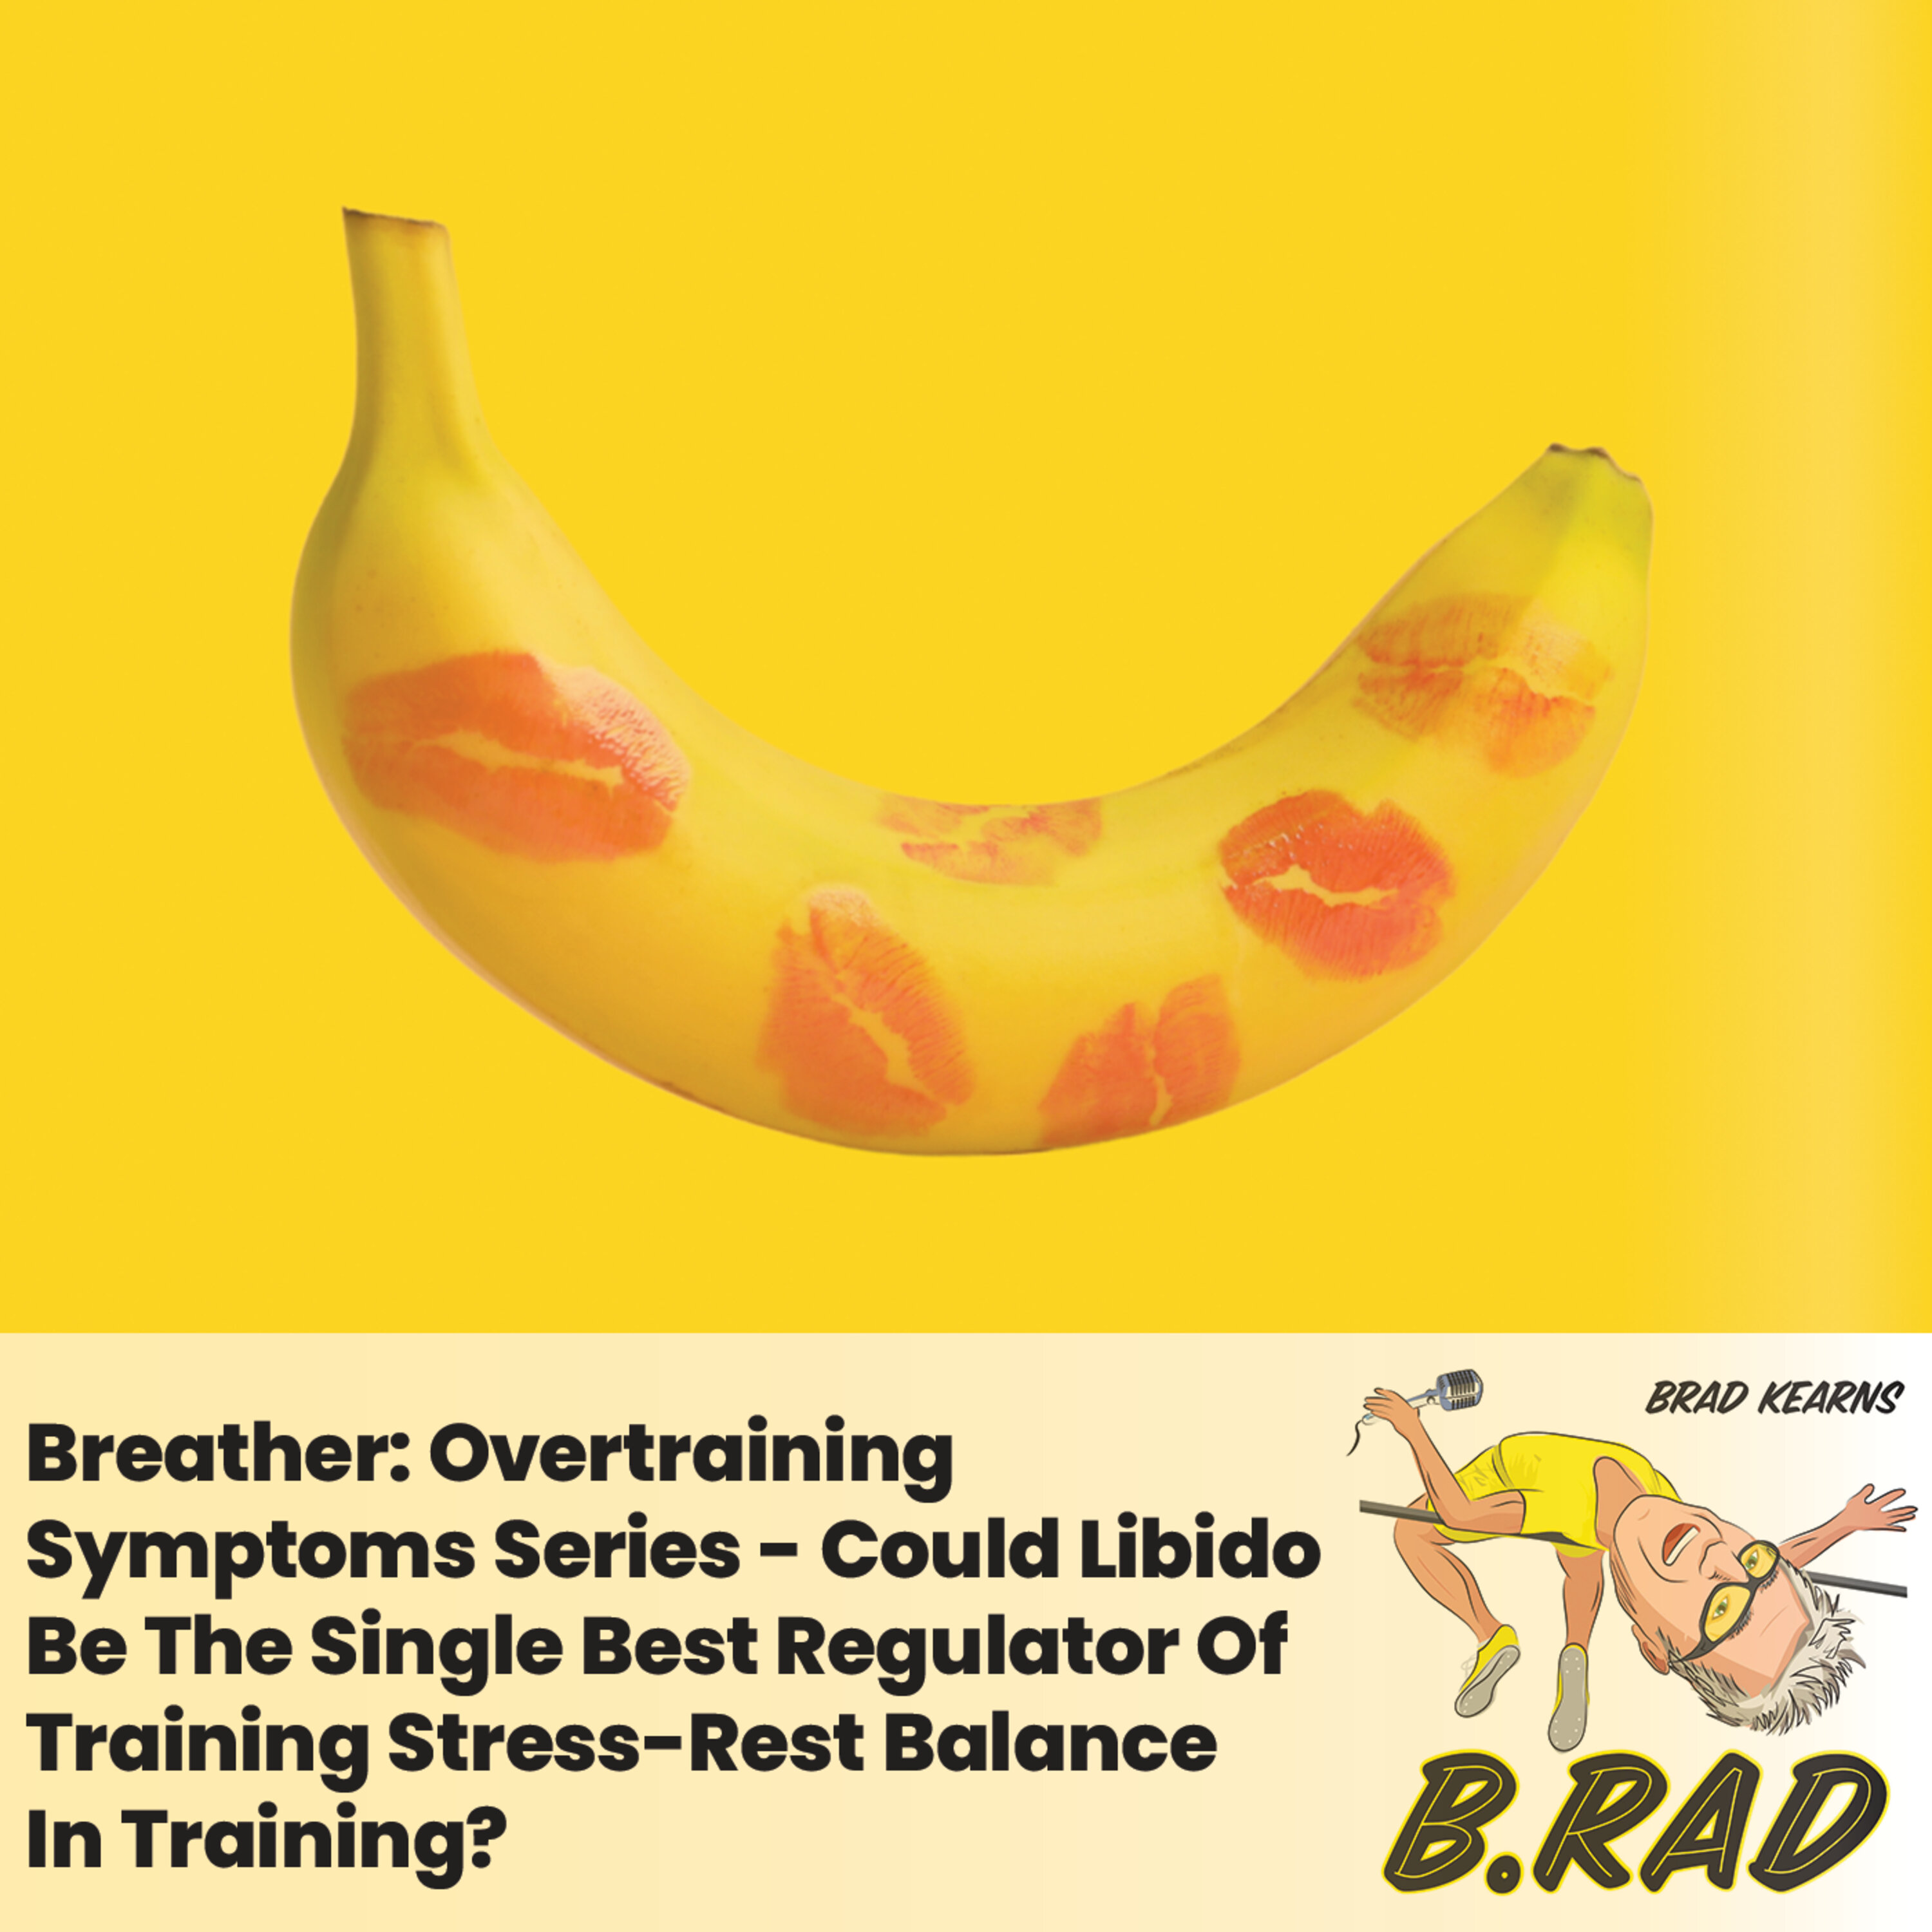 Breather: Overtraining Symptoms Series - Could Libido Be The Single Best Regulator Of Training Stress-Rest Balance In Training?